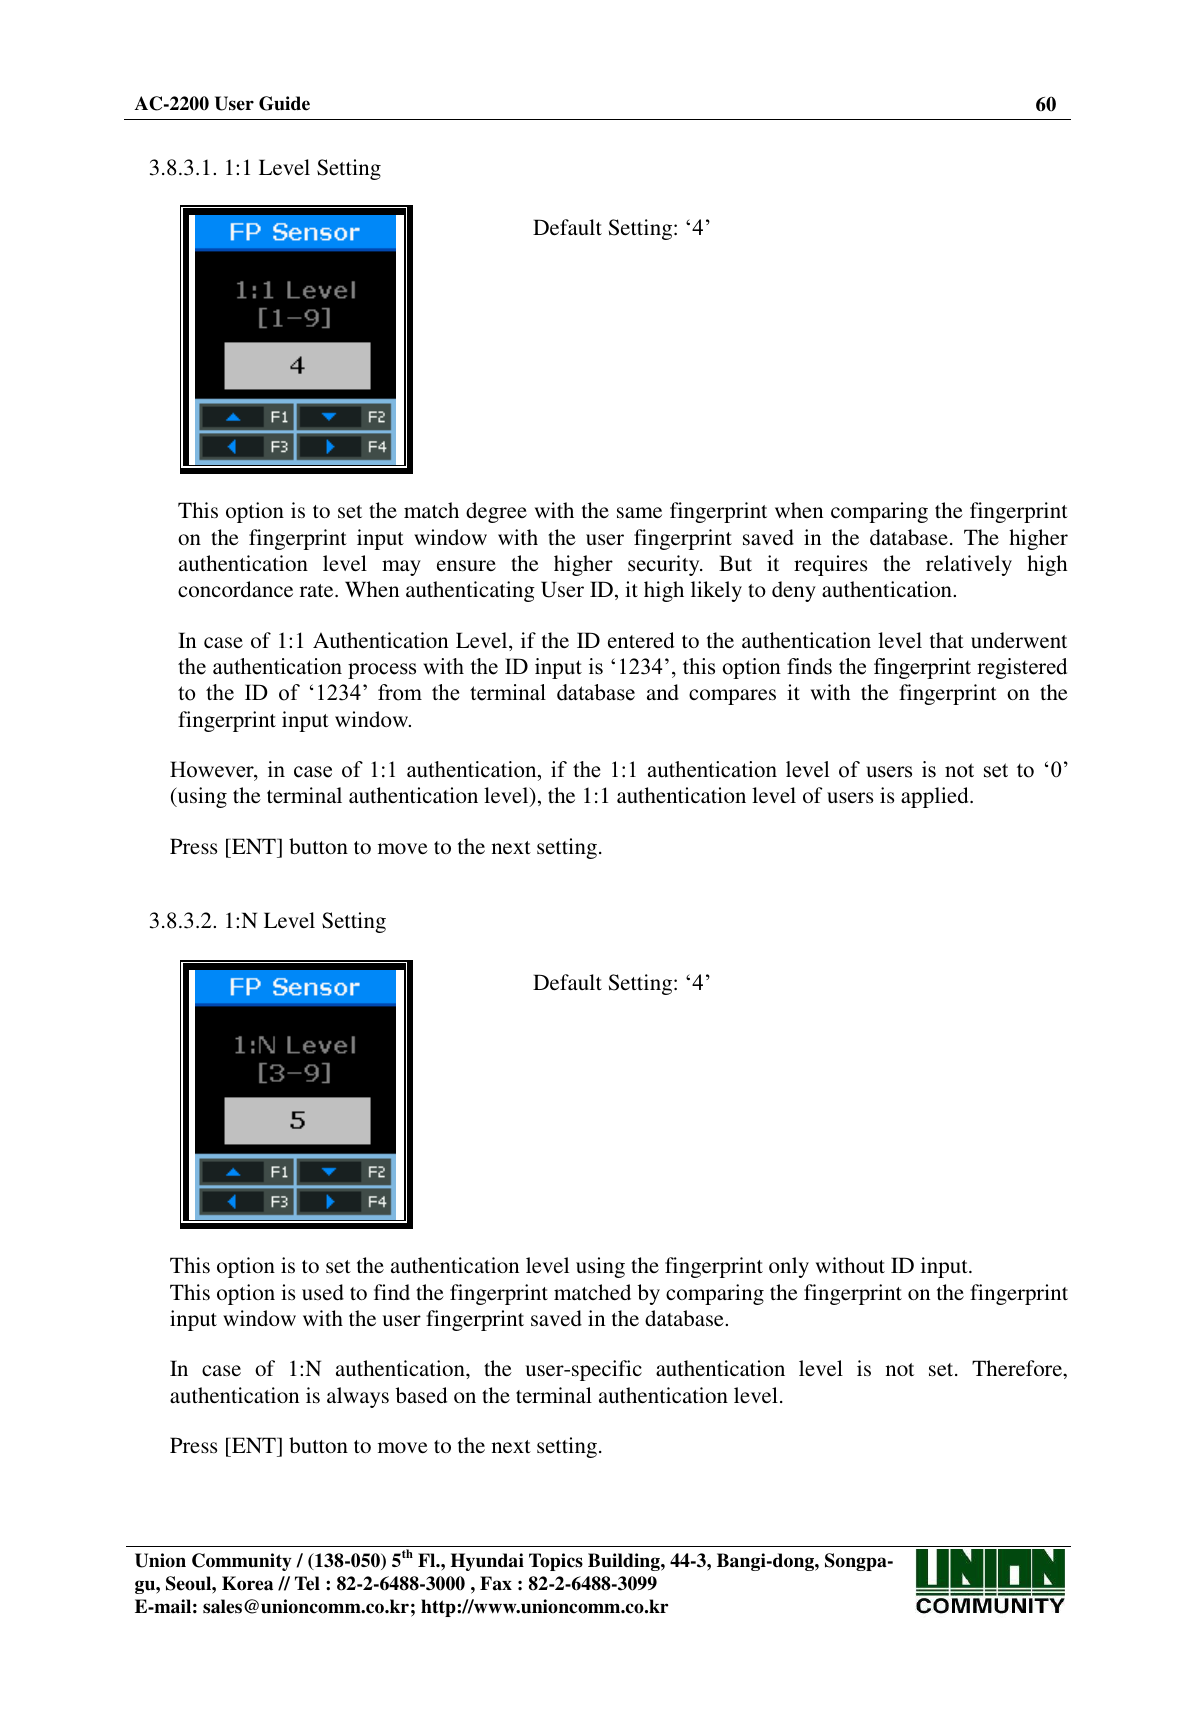  AC-2200 User Guide 60   Union Community / (138-050) 5th Fl., Hyundai Topics Building, 44-3, Bangi-dong, Songpa-gu, Seoul, Korea // Tel : 82-2-6488-3000 , Fax : 82-2-6488-3099 E-mail: sales@unioncomm.co.kr; http://www.unioncomm.co.kr    3.8.3.1. 1:1 Level Setting    Default Setting: ‘4’  This option is to set the match degree with the same fingerprint when comparing the fingerprint on  the  fingerprint  input  window  with  the  user  fingerprint  saved  in  the  database.  The  higher authentication  level  may  ensure  the  higher  security.  But  it  requires  the  relatively  high concordance rate. When authenticating User ID, it high likely to deny authentication.  In case of 1:1 Authentication Level, if the ID entered to the authentication level that underwent the authentication process with the ID input is ‘1234’, this option finds the fingerprint registered to  the  ID  of  ‘1234’  from  the  terminal  database  and  compares  it  with  the  fingerprint  on  the fingerprint input window.  However,  in  case  of 1:1  authentication, if  the  1:1  authentication level  of  users is  not  set  to ‘0’ (using the terminal authentication level), the 1:1 authentication level of users is applied.  Press [ENT] button to move to the next setting.   3.8.3.2. 1:N Level Setting    Default Setting: ‘4’  This option is to set the authentication level using the fingerprint only without ID input. This option is used to find the fingerprint matched by comparing the fingerprint on the fingerprint input window with the user fingerprint saved in the database.  In  case  of  1:N  authentication,  the  user-specific  authentication  level  is  not  set.  Therefore, authentication is always based on the terminal authentication level.  Press [ENT] button to move to the next setting. 